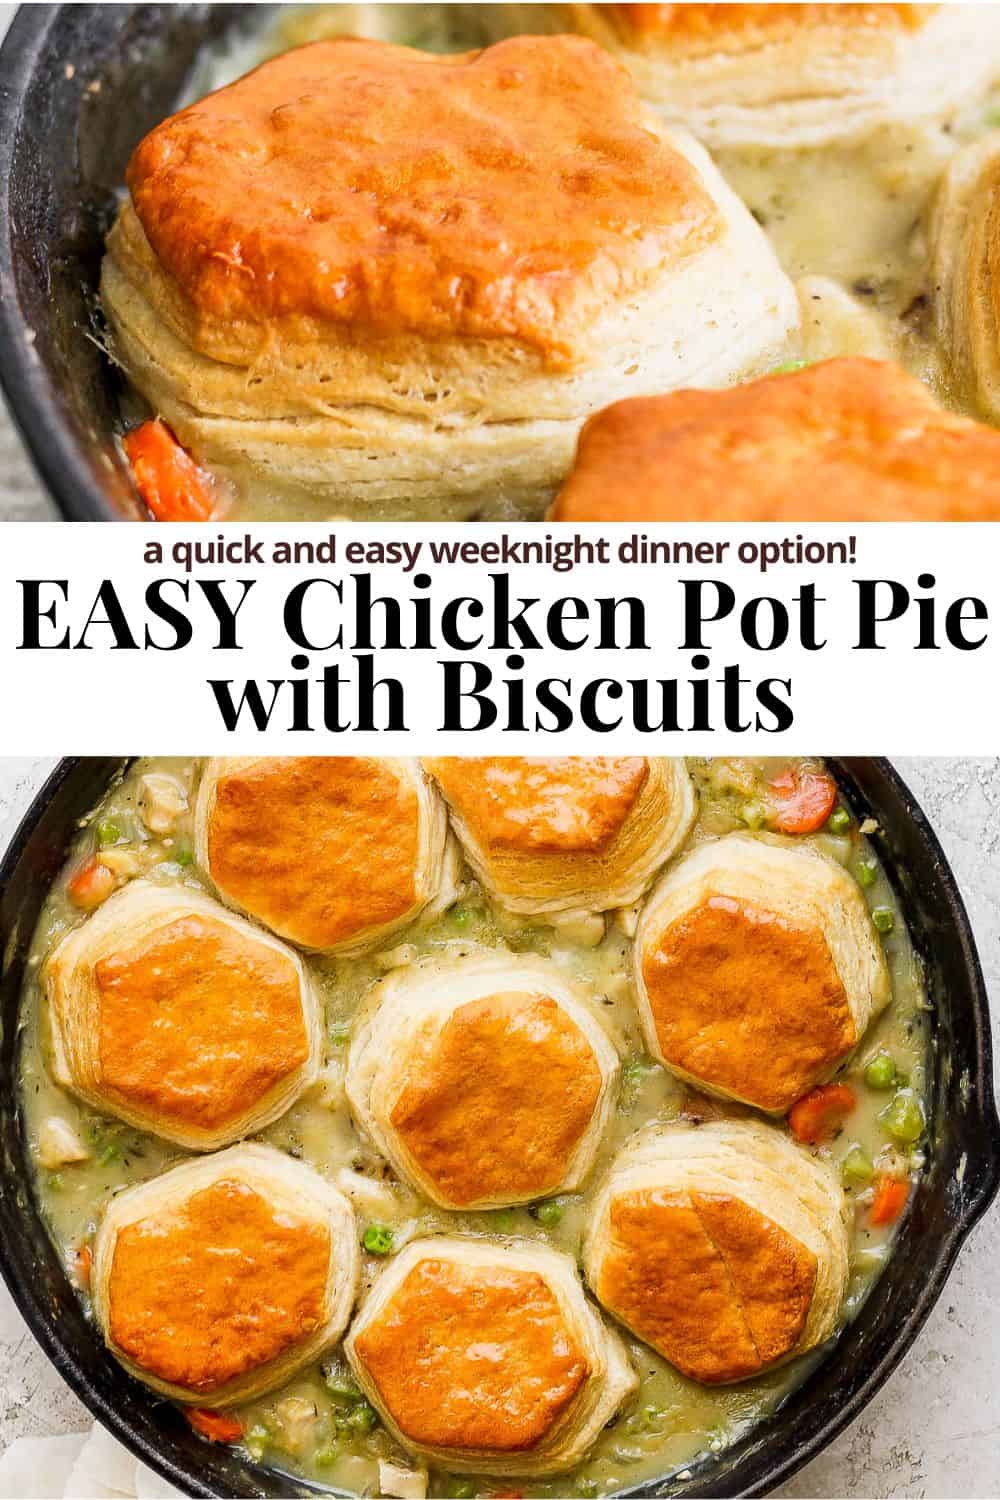 Pinterest image for chicken pot pie with biscuits.